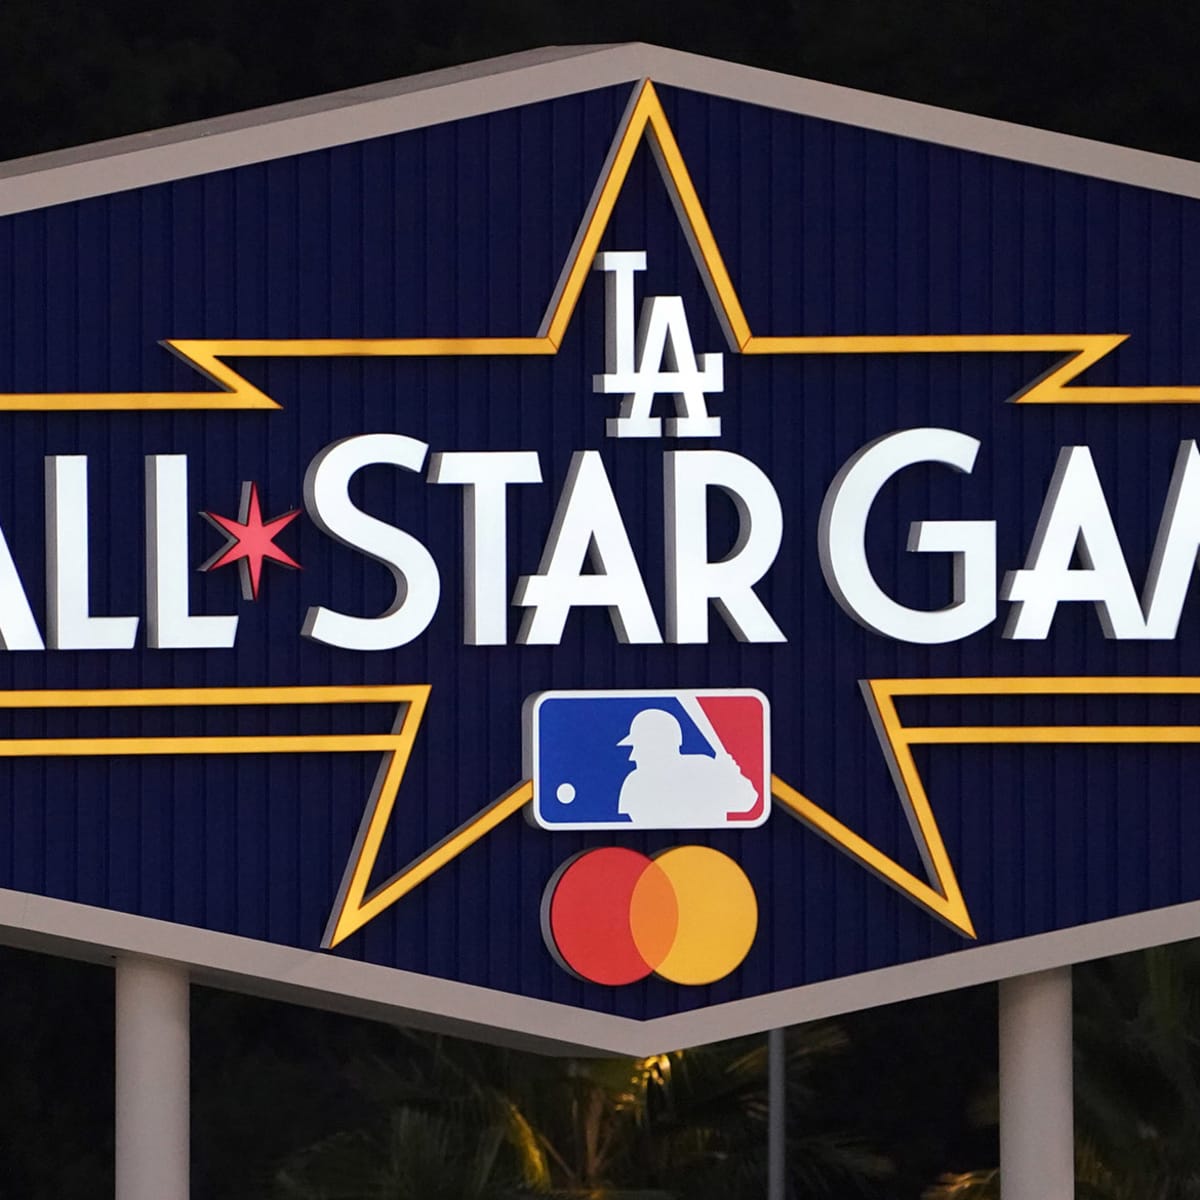 MLB moves All-Star Game, draft out of Georgia after voting